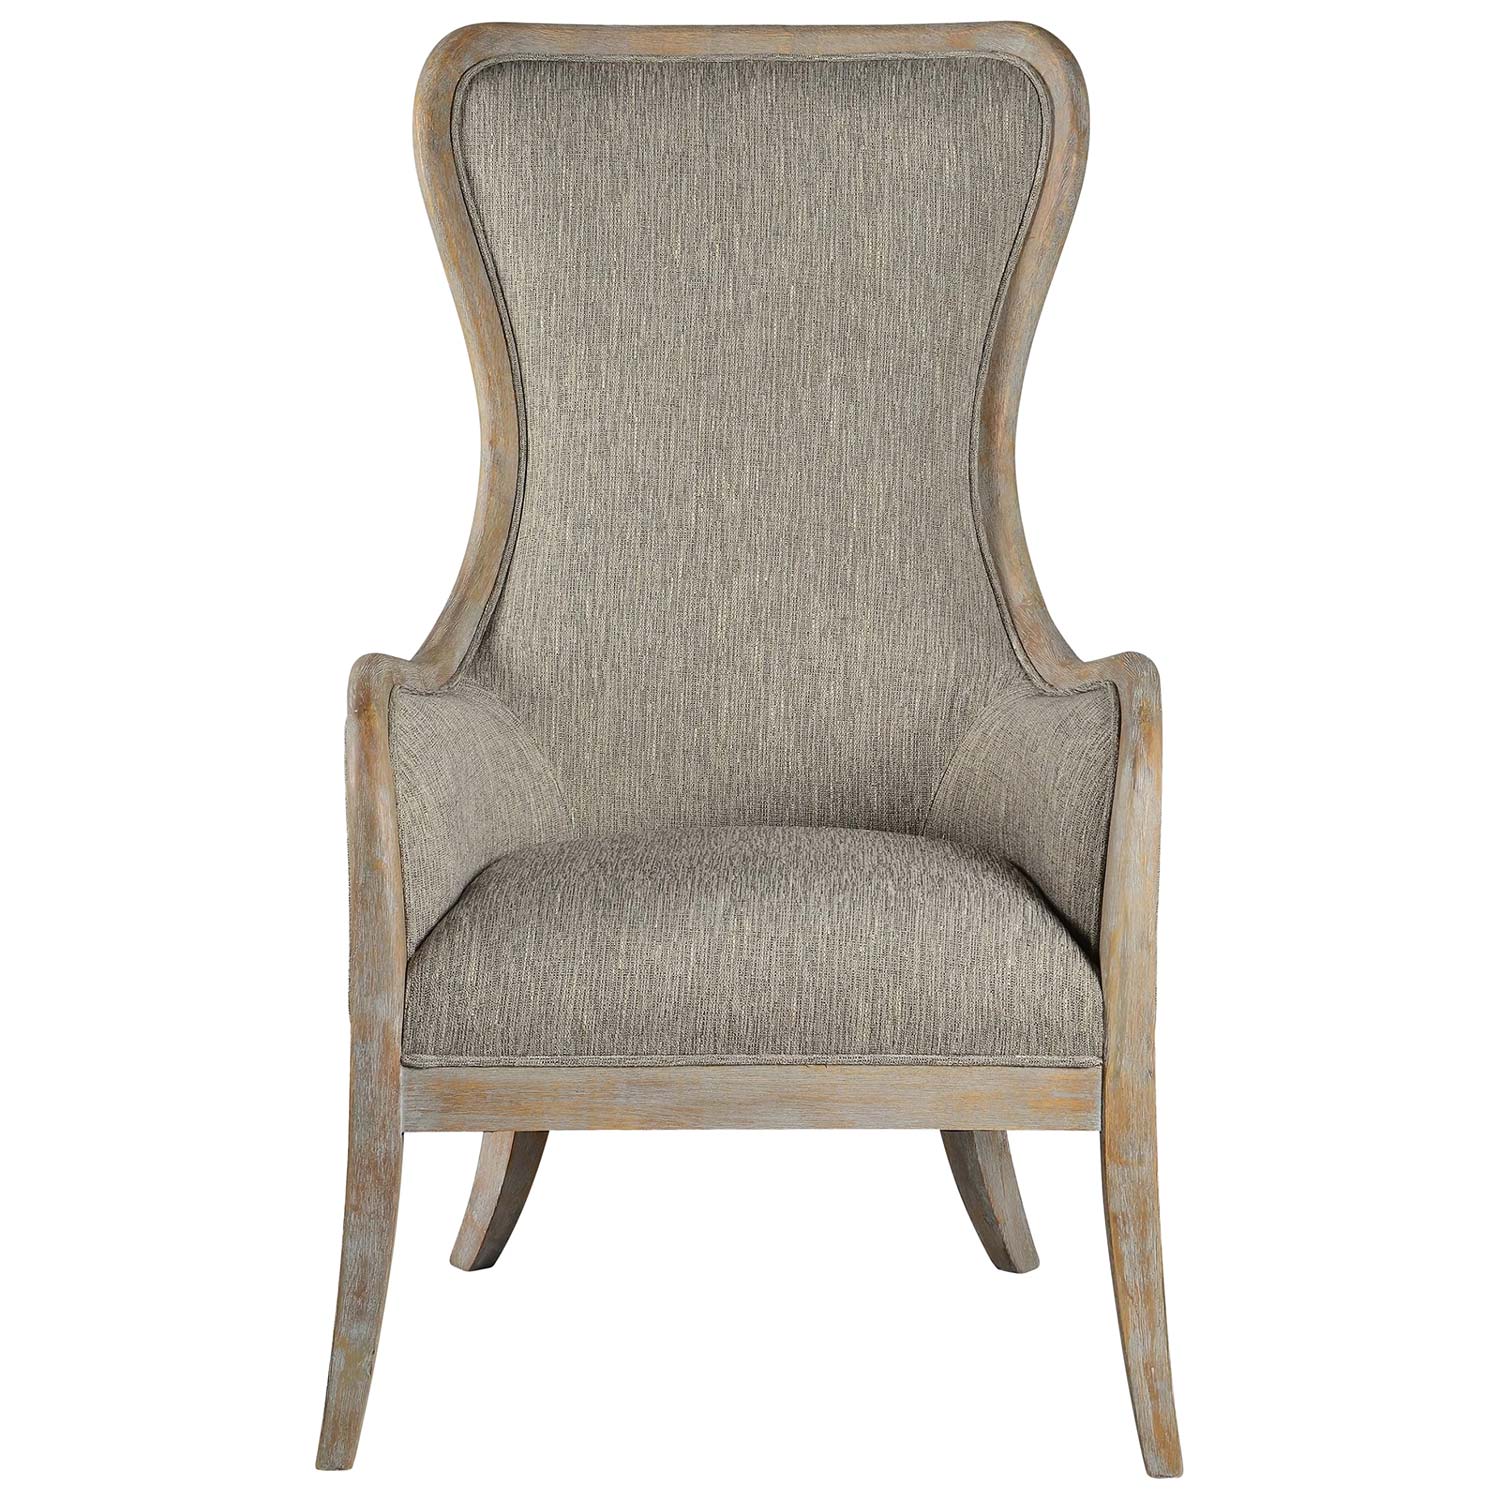 Forty West Cleveland Linen Chair